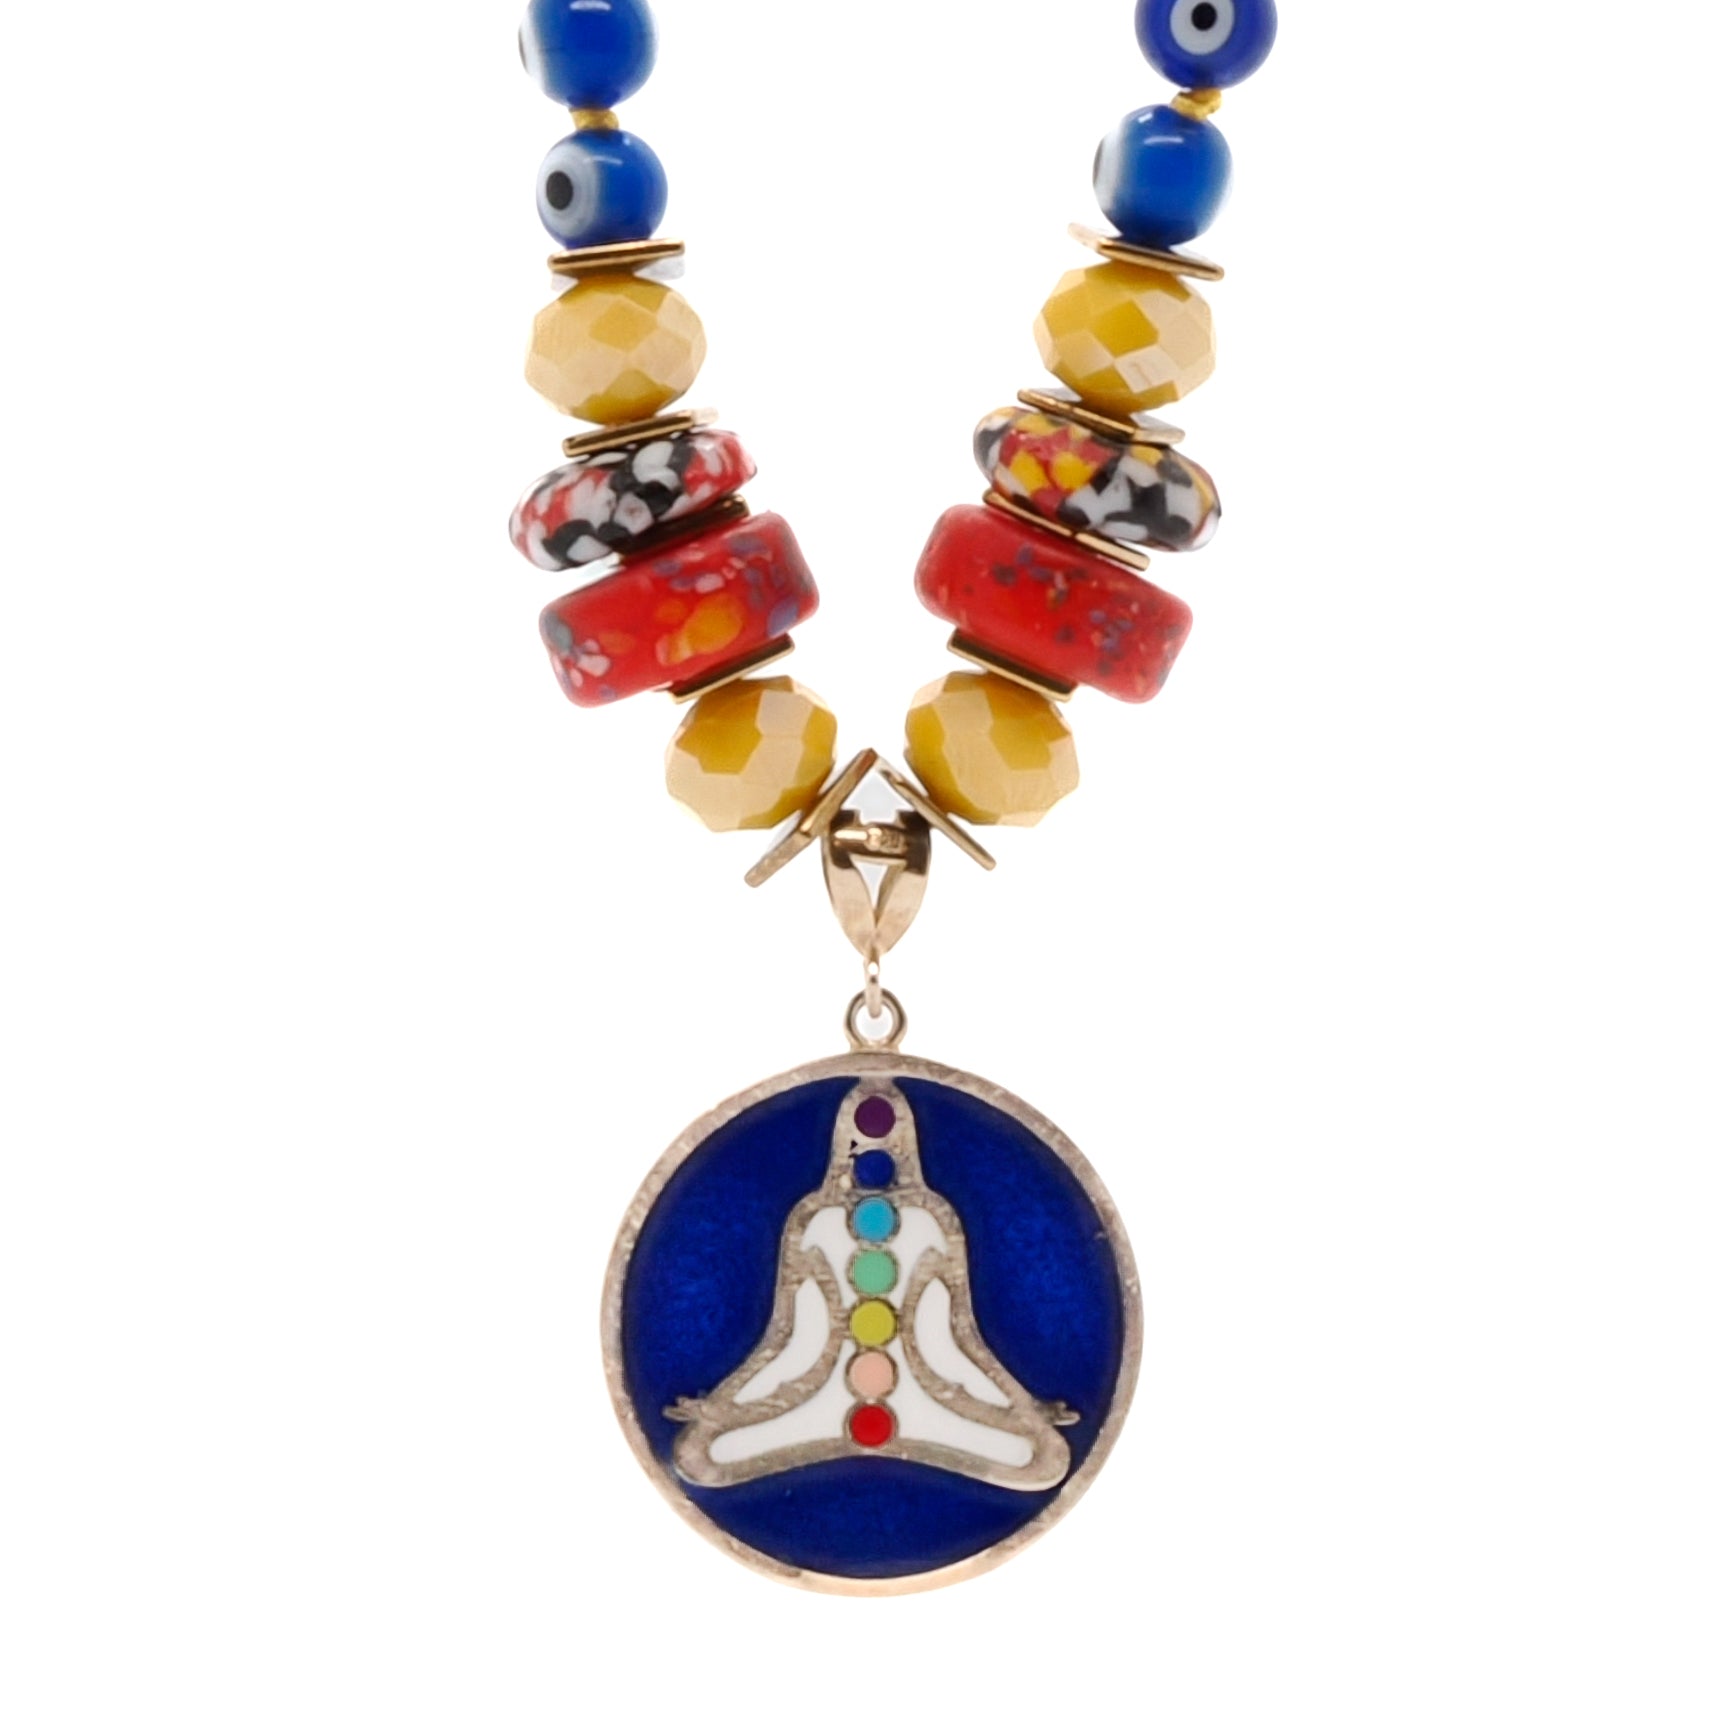 A powerful and protective handmade necklace featuring evil eye beads, colorful African beads, and Nepal meditation beads. The necklace also showcases a 925 silver 14k gold plated chakra yoga pendant with colorful enamel, symbolizing the balance and alignment of the body's energy centers.